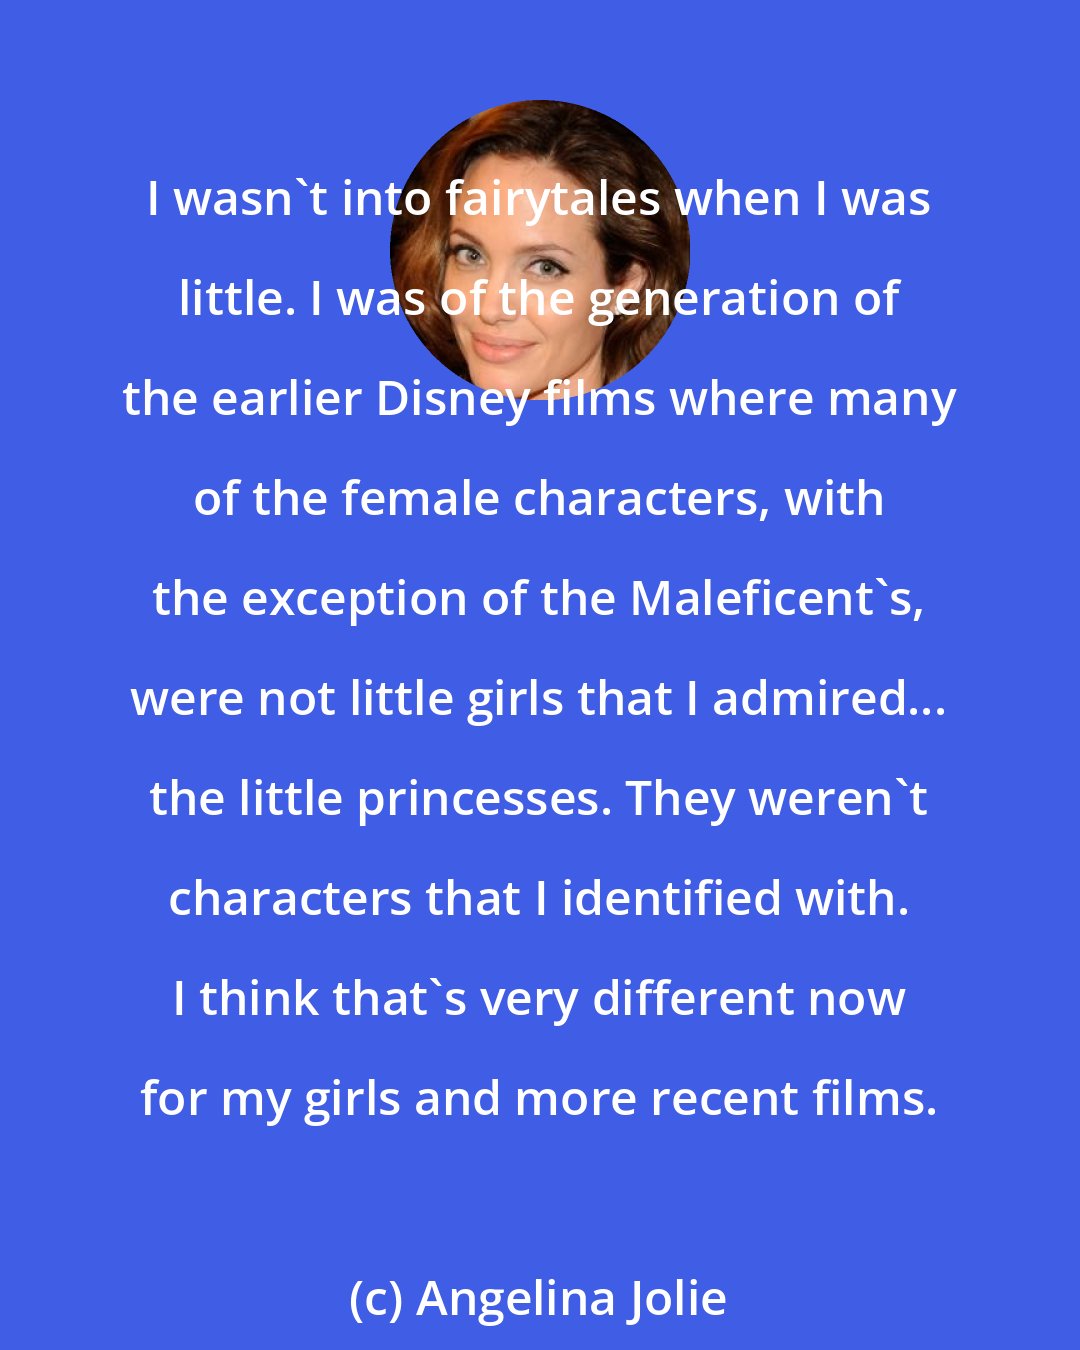 Angelina Jolie: I wasn't into fairytales when I was little. I was of the generation of the earlier Disney films where many of the female characters, with the exception of the Maleficent's, were not little girls that I admired... the little princesses. They weren't characters that I identified with. I think that's very different now for my girls and more recent films.